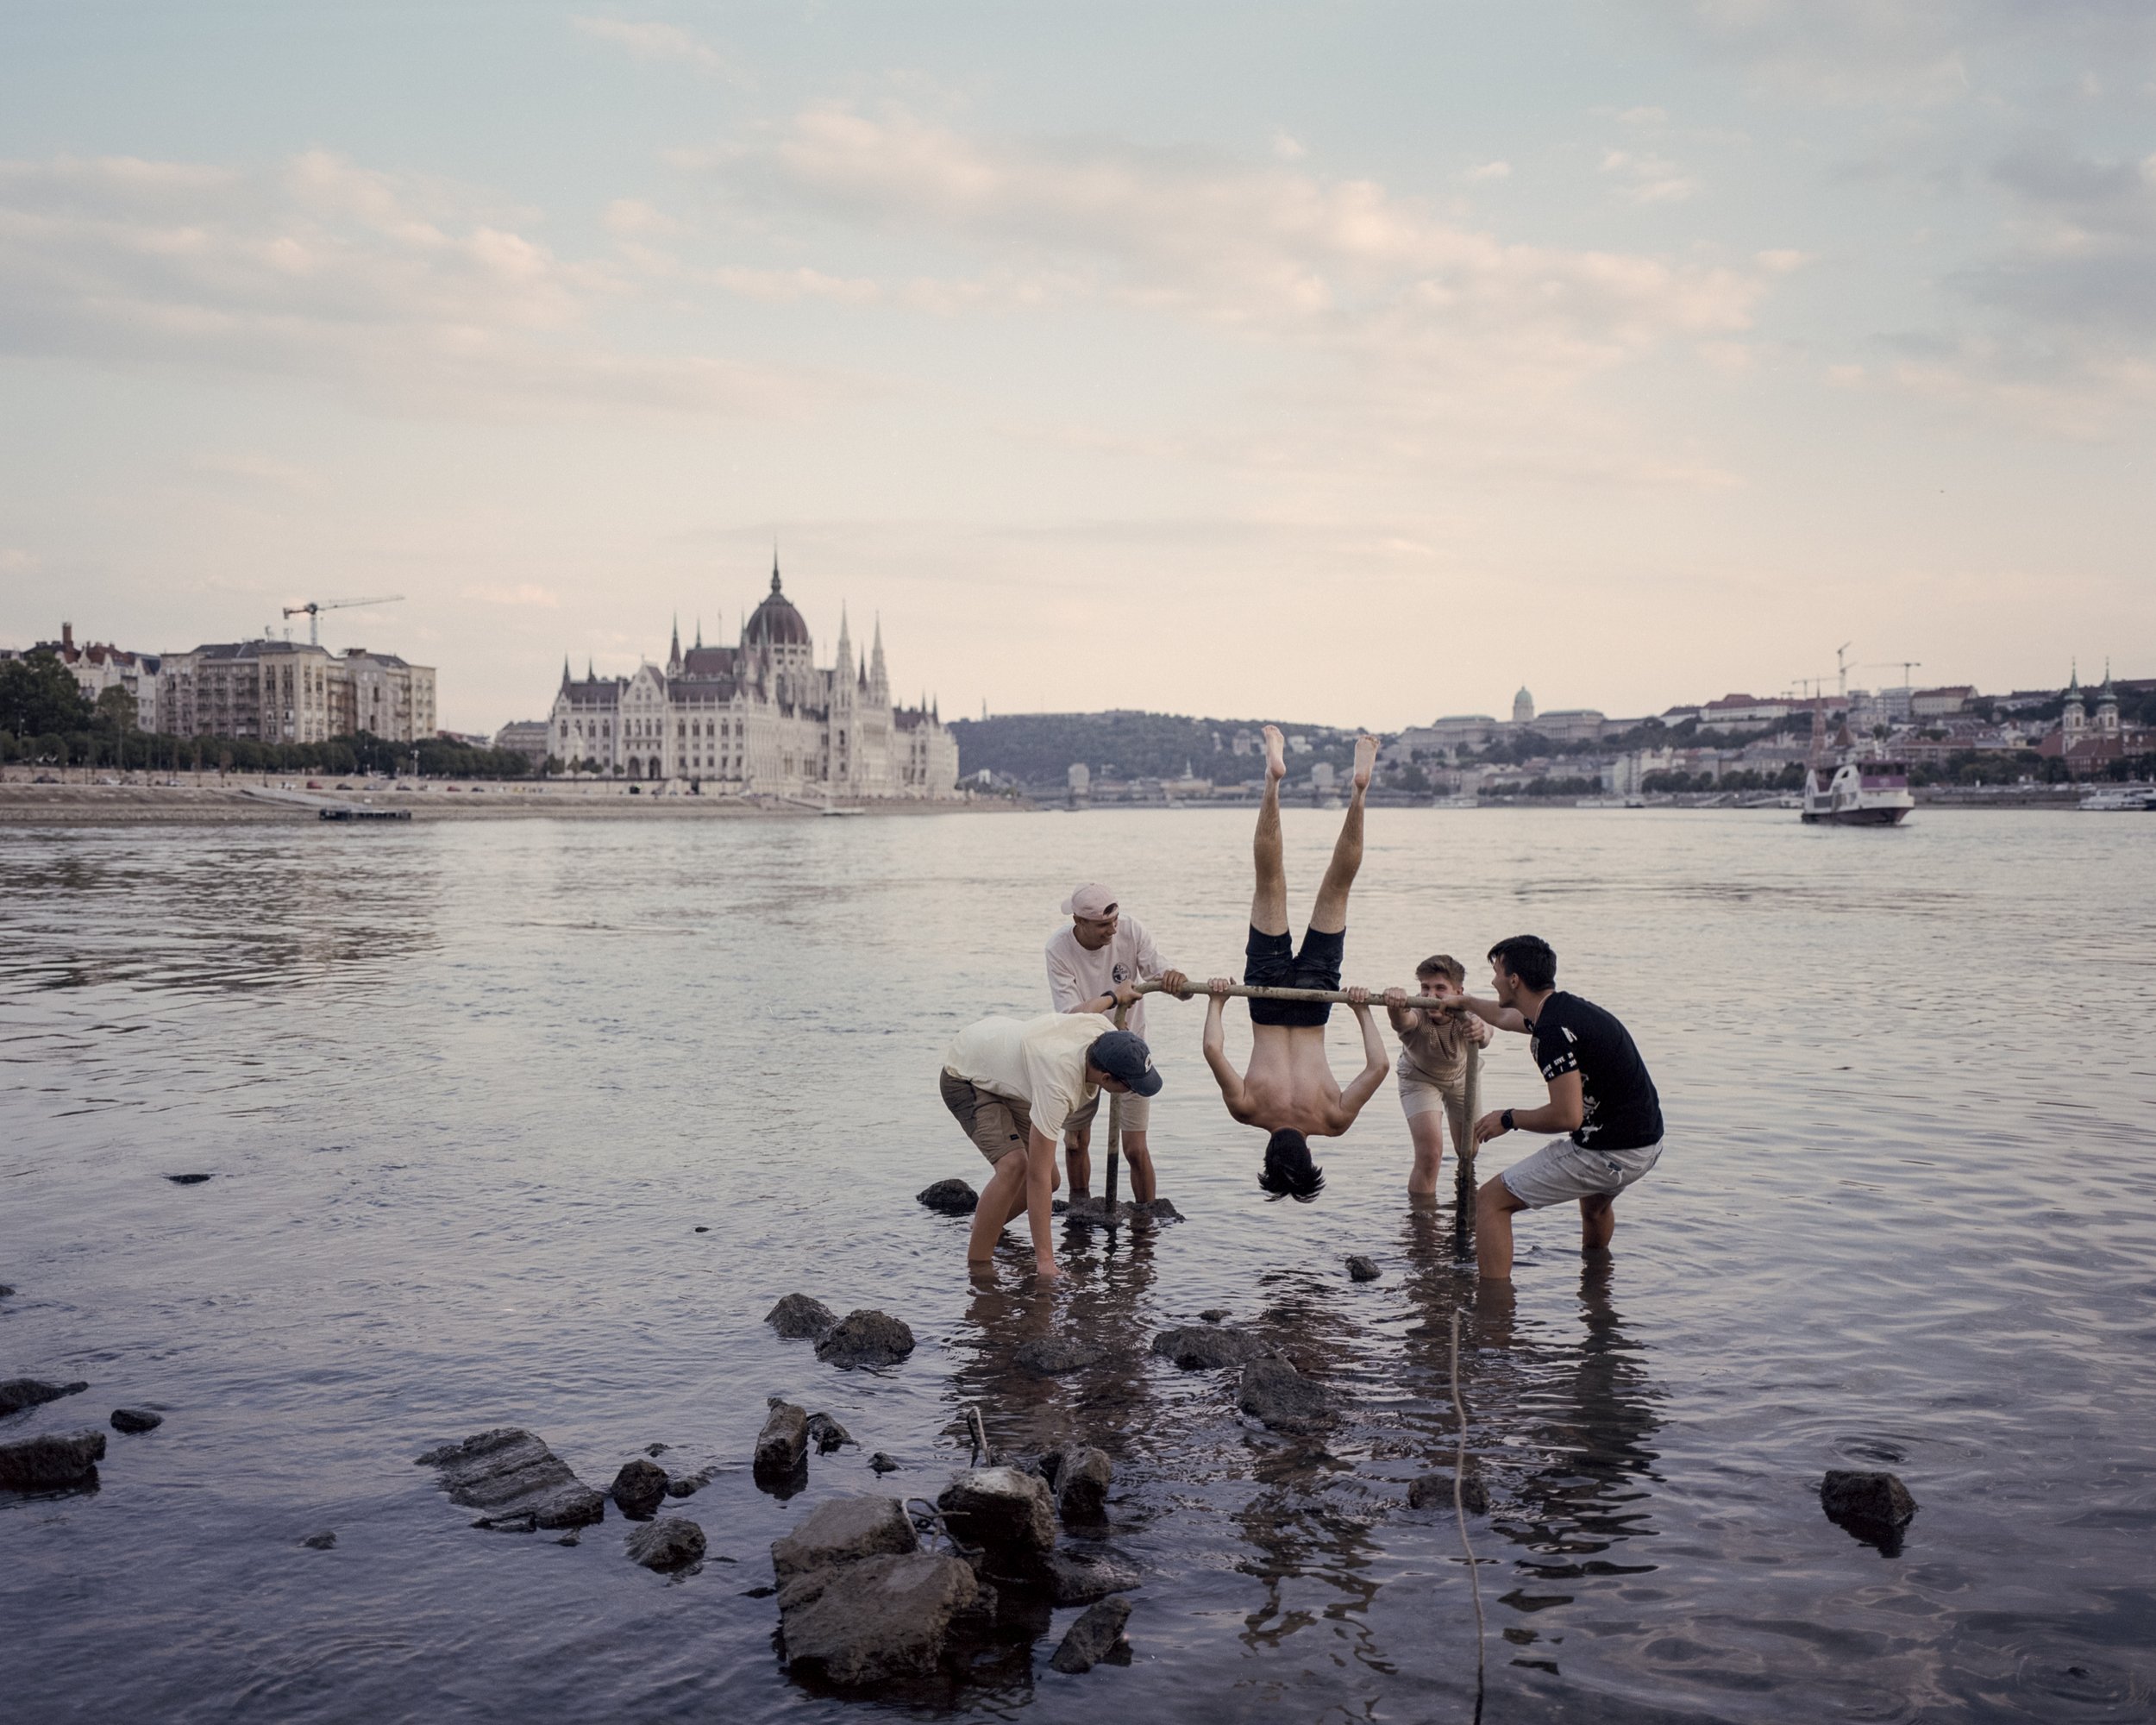  Youngsters playing in the middle of the Danube at extremely low water level. Budapest, Hungary, 2022 